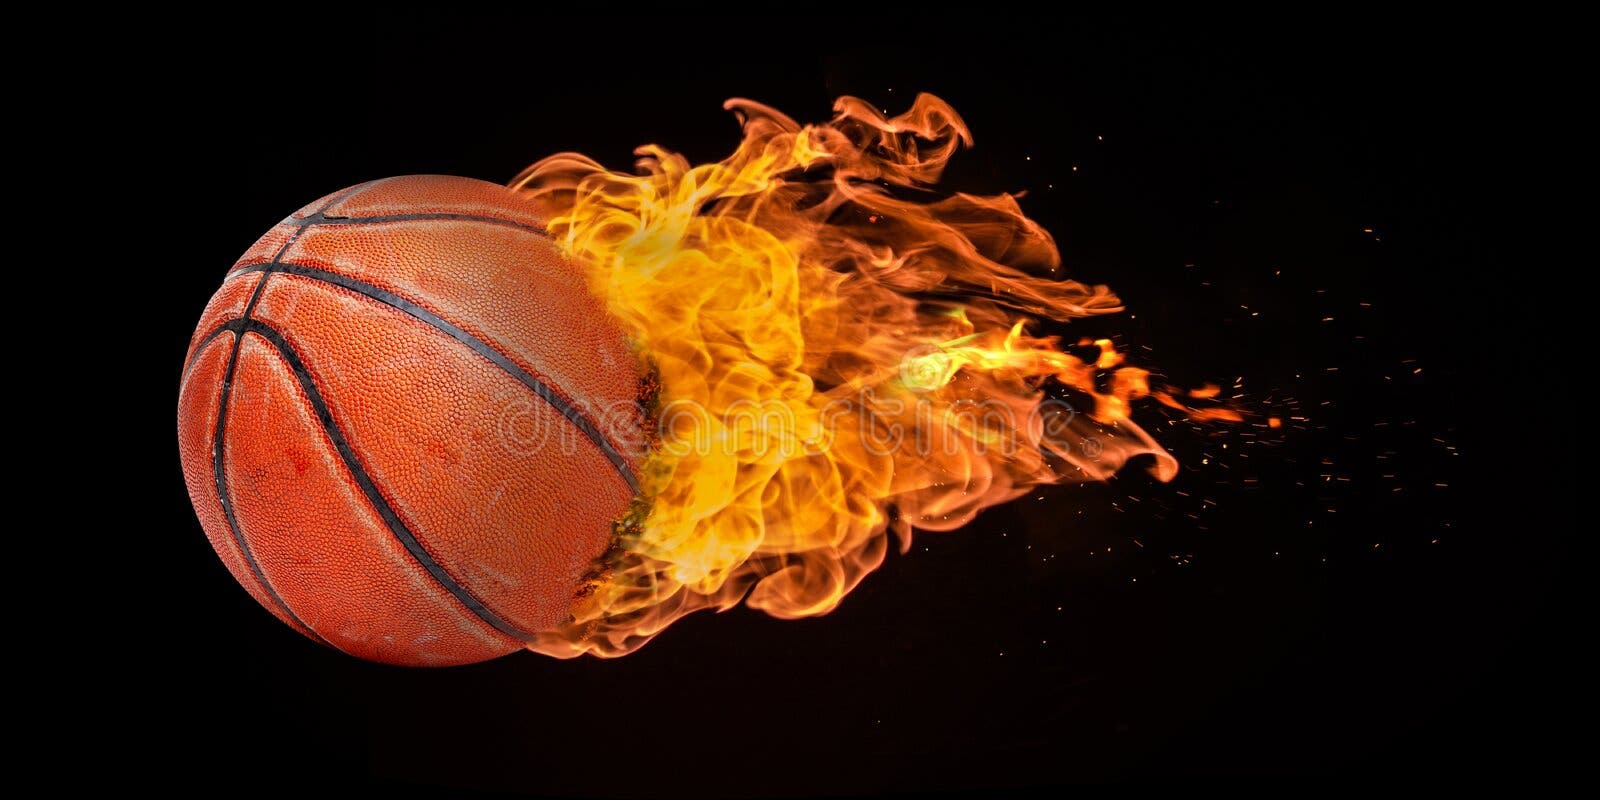 Poster Basketball ball in fire flames and splashing water 